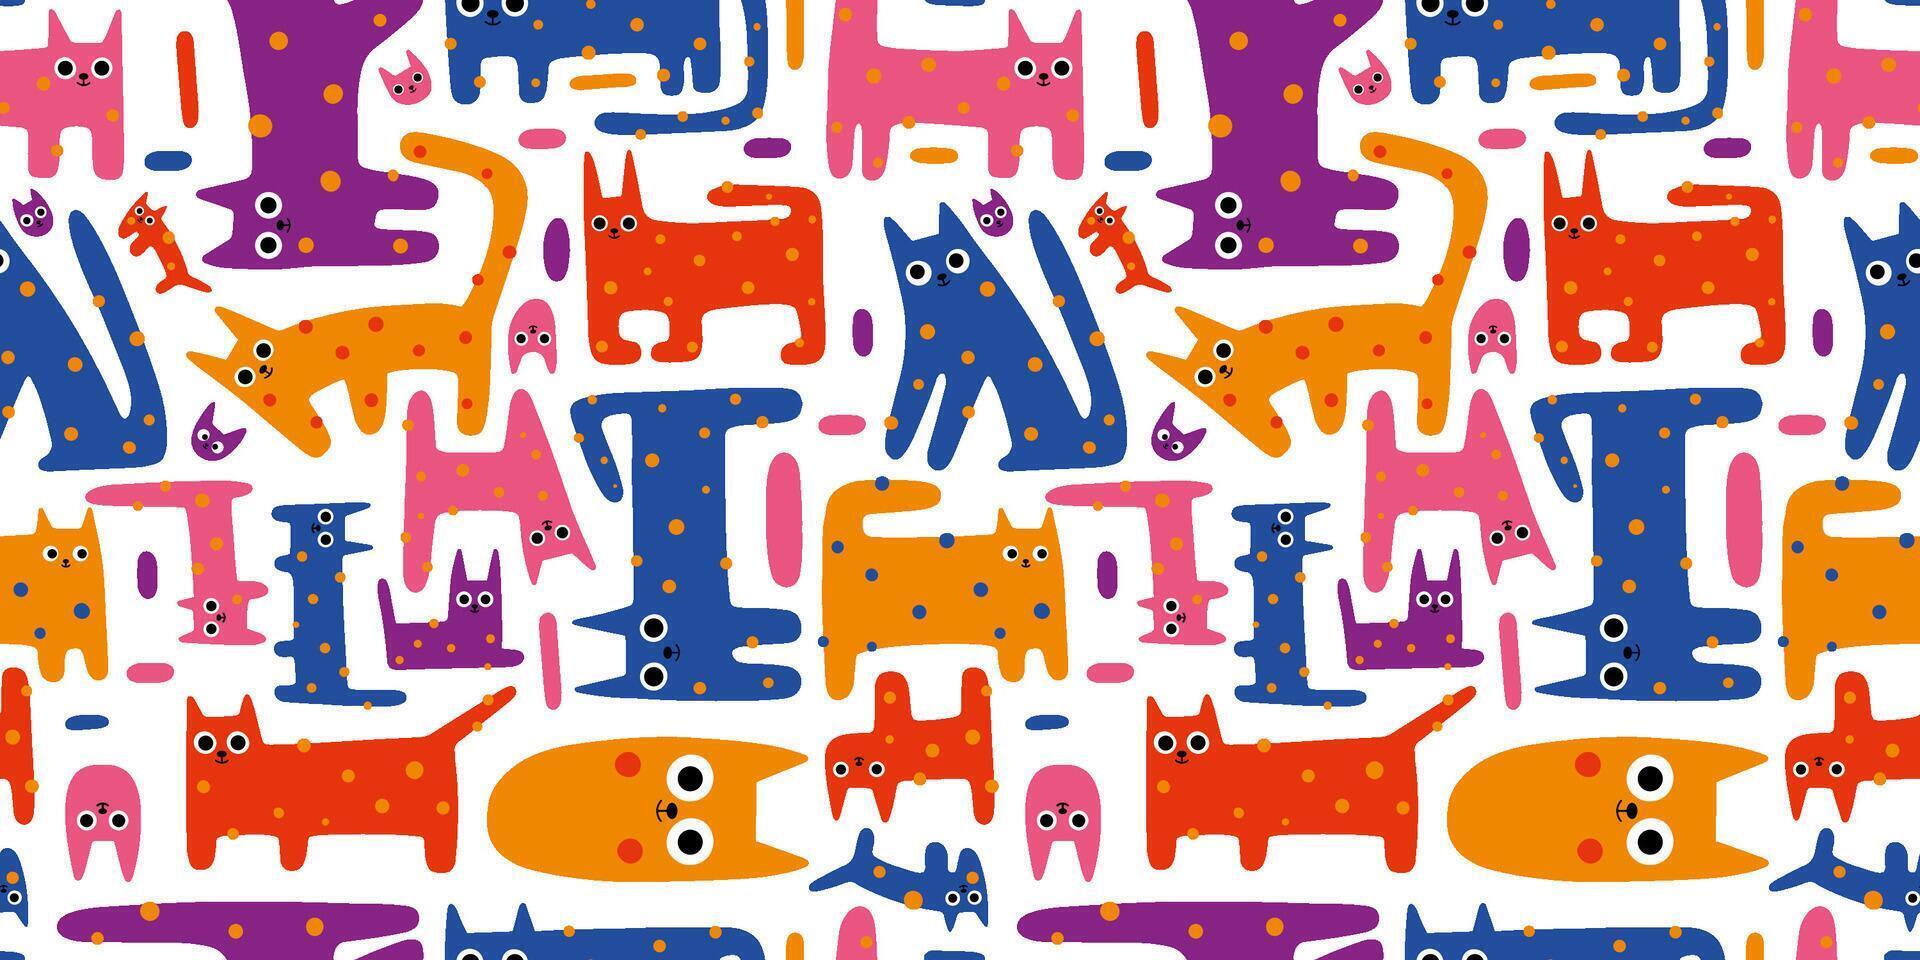 Seamless pattern with cute funny cats, colorful kitten, cartoon style. Trendy modern illustration on white background, hand drawn, flat design vector